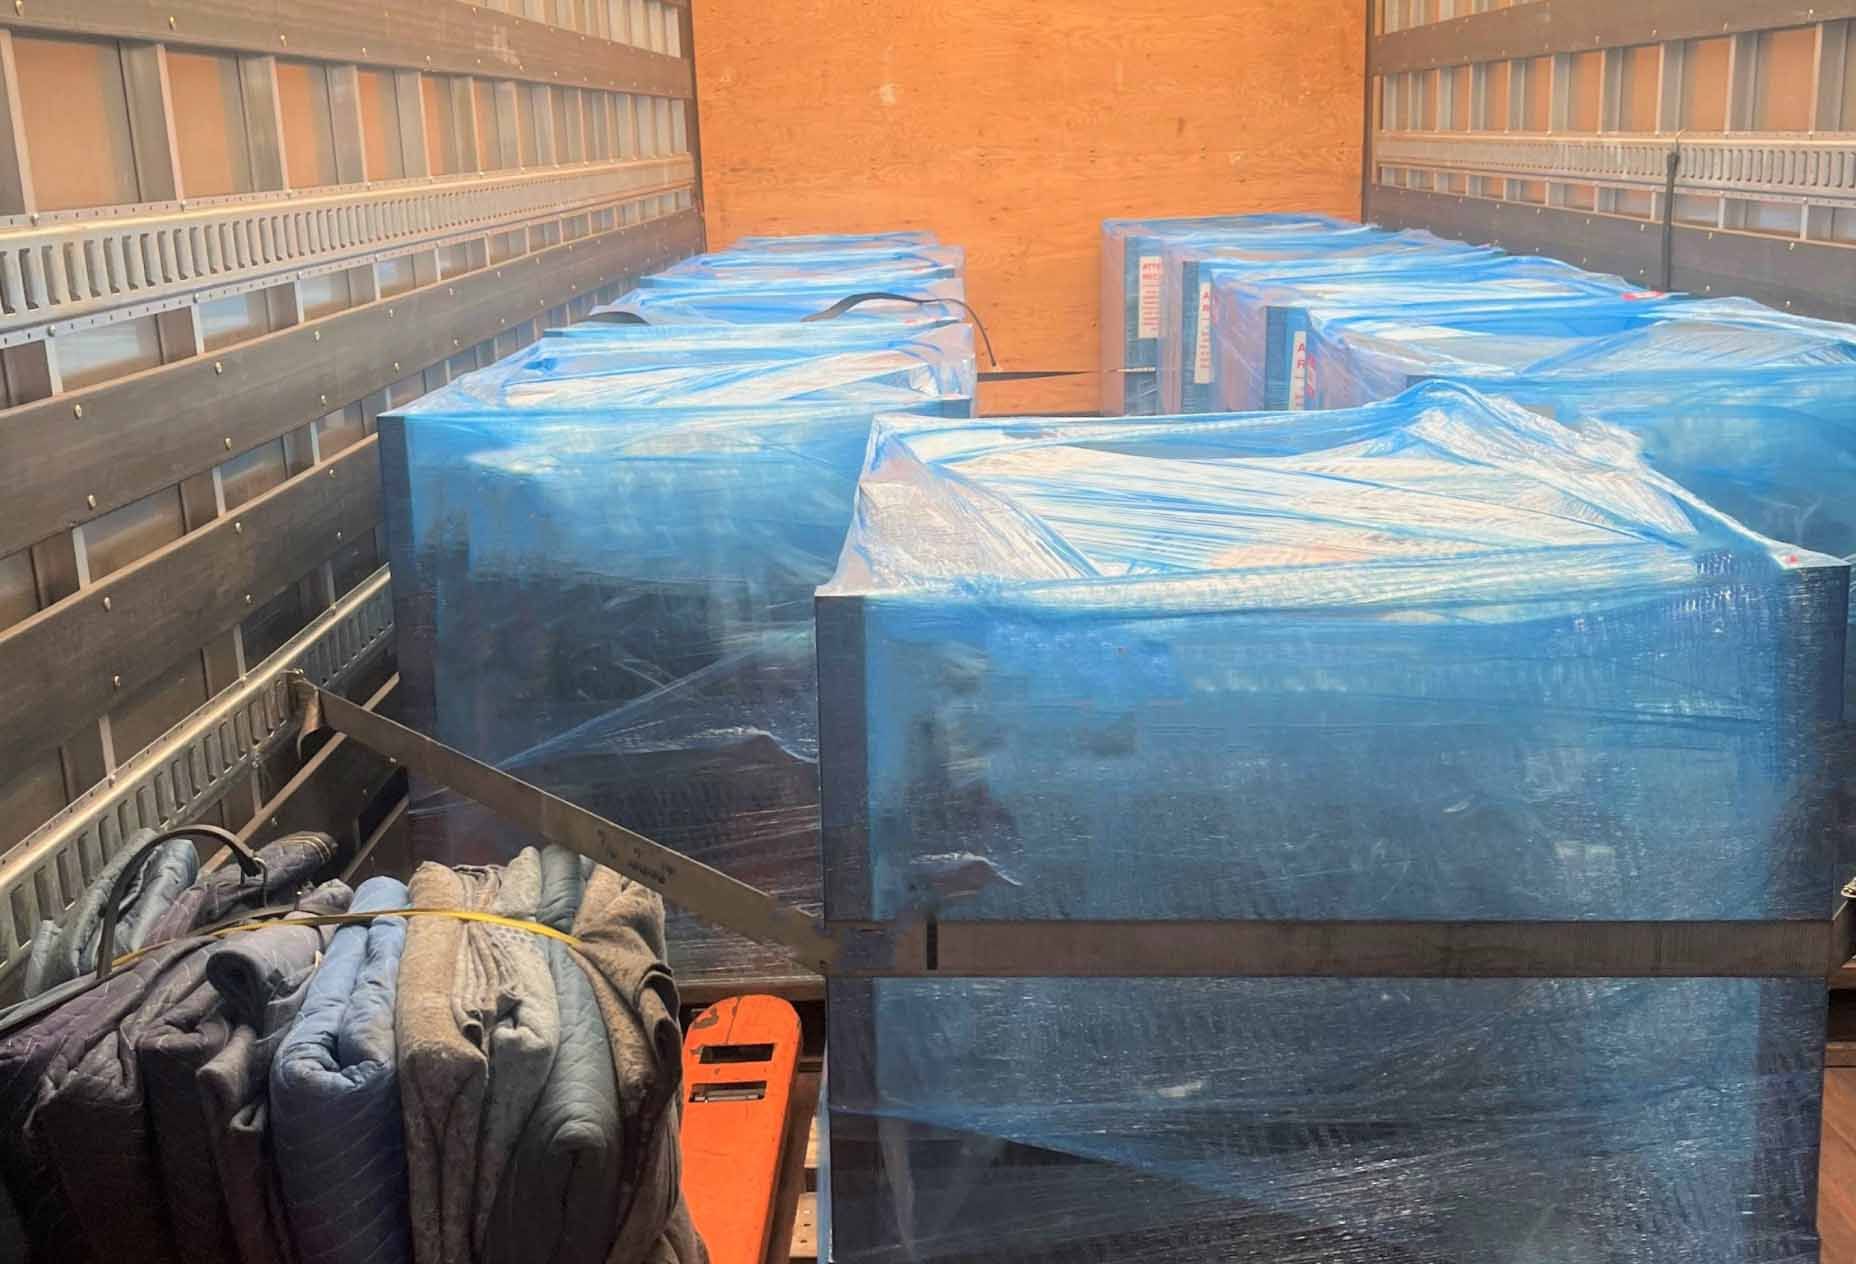 The interior of an enclosed freight truck containing fragile packages and moving blankets.